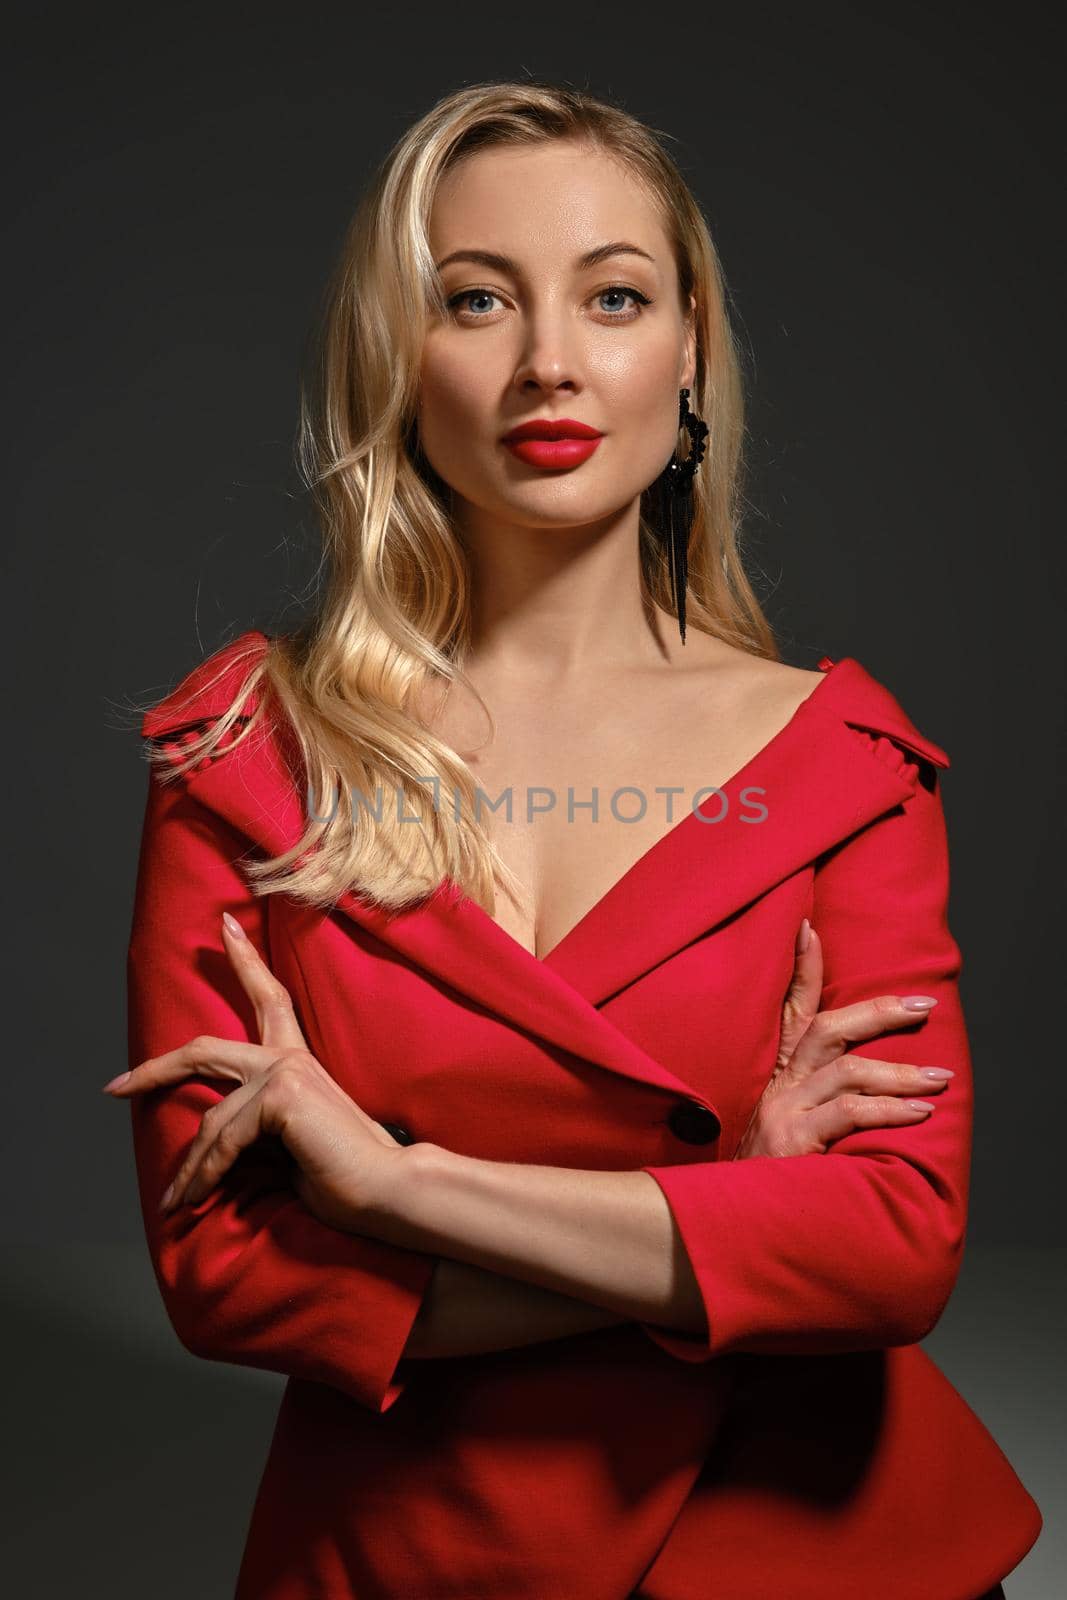 Gorgeous blonde female with bright make-up and deep neckline, hands folded, in red dress and black earrings. She is smiling, posing against gray background. Fashion and beauty. Copy space, close up